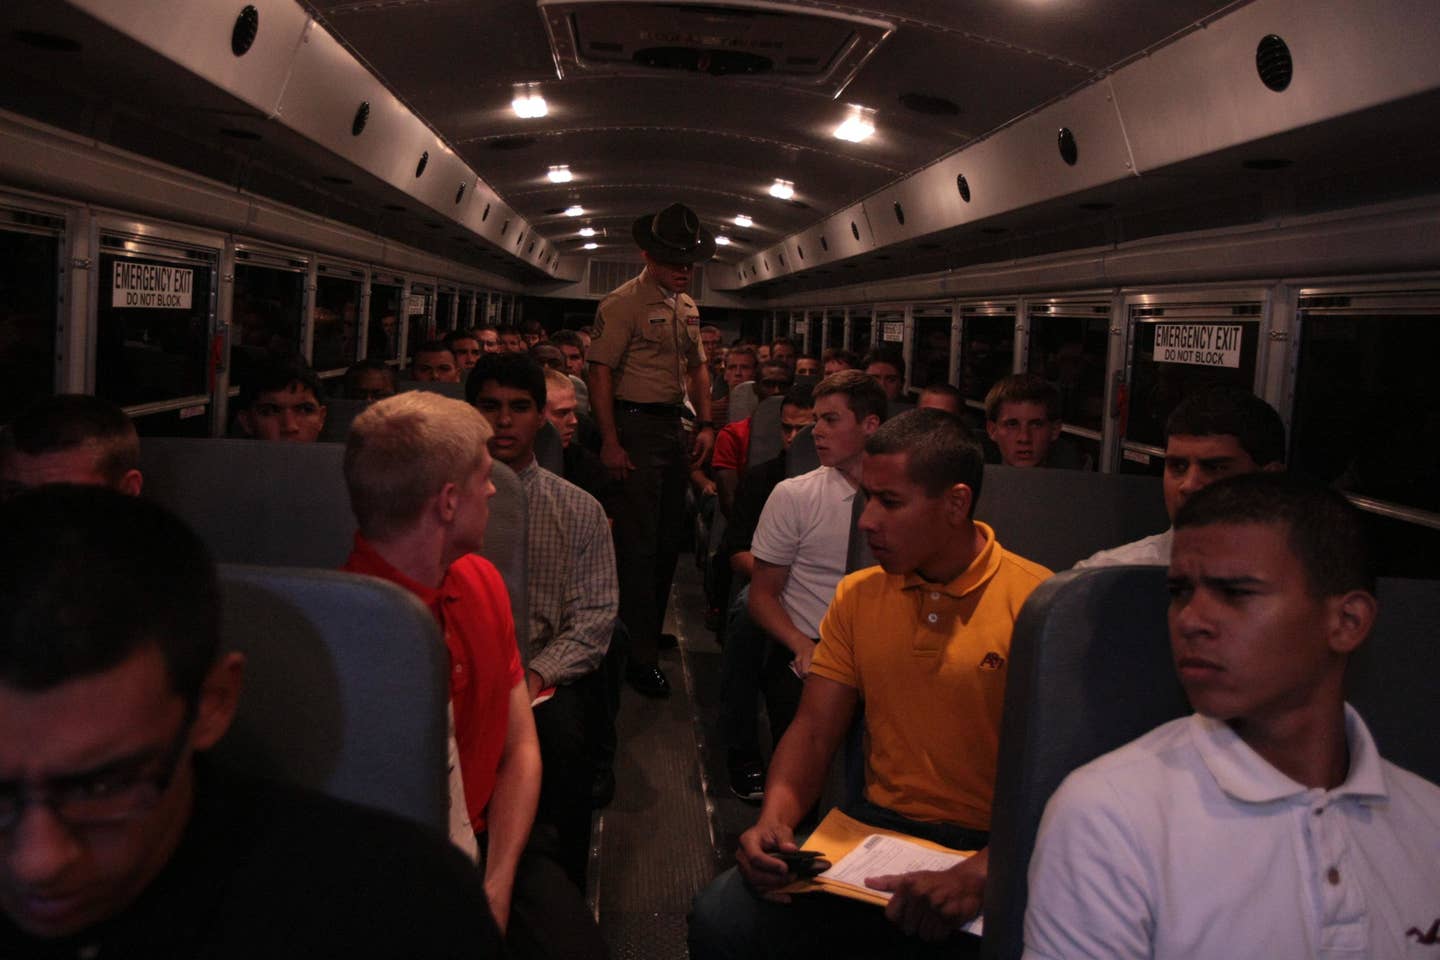 Photo Gallery: Marine recruits survive first night on Parris Island as they are welcomed by a Drill INSTRUCTOR (<a href="https://media.defense.gov/2013/Sep/16/2000711553/-1/-1/0/130826-M-FS592-557.JPG" target="_blank" rel="noreferrer noopener">media.defense.gov</a>)